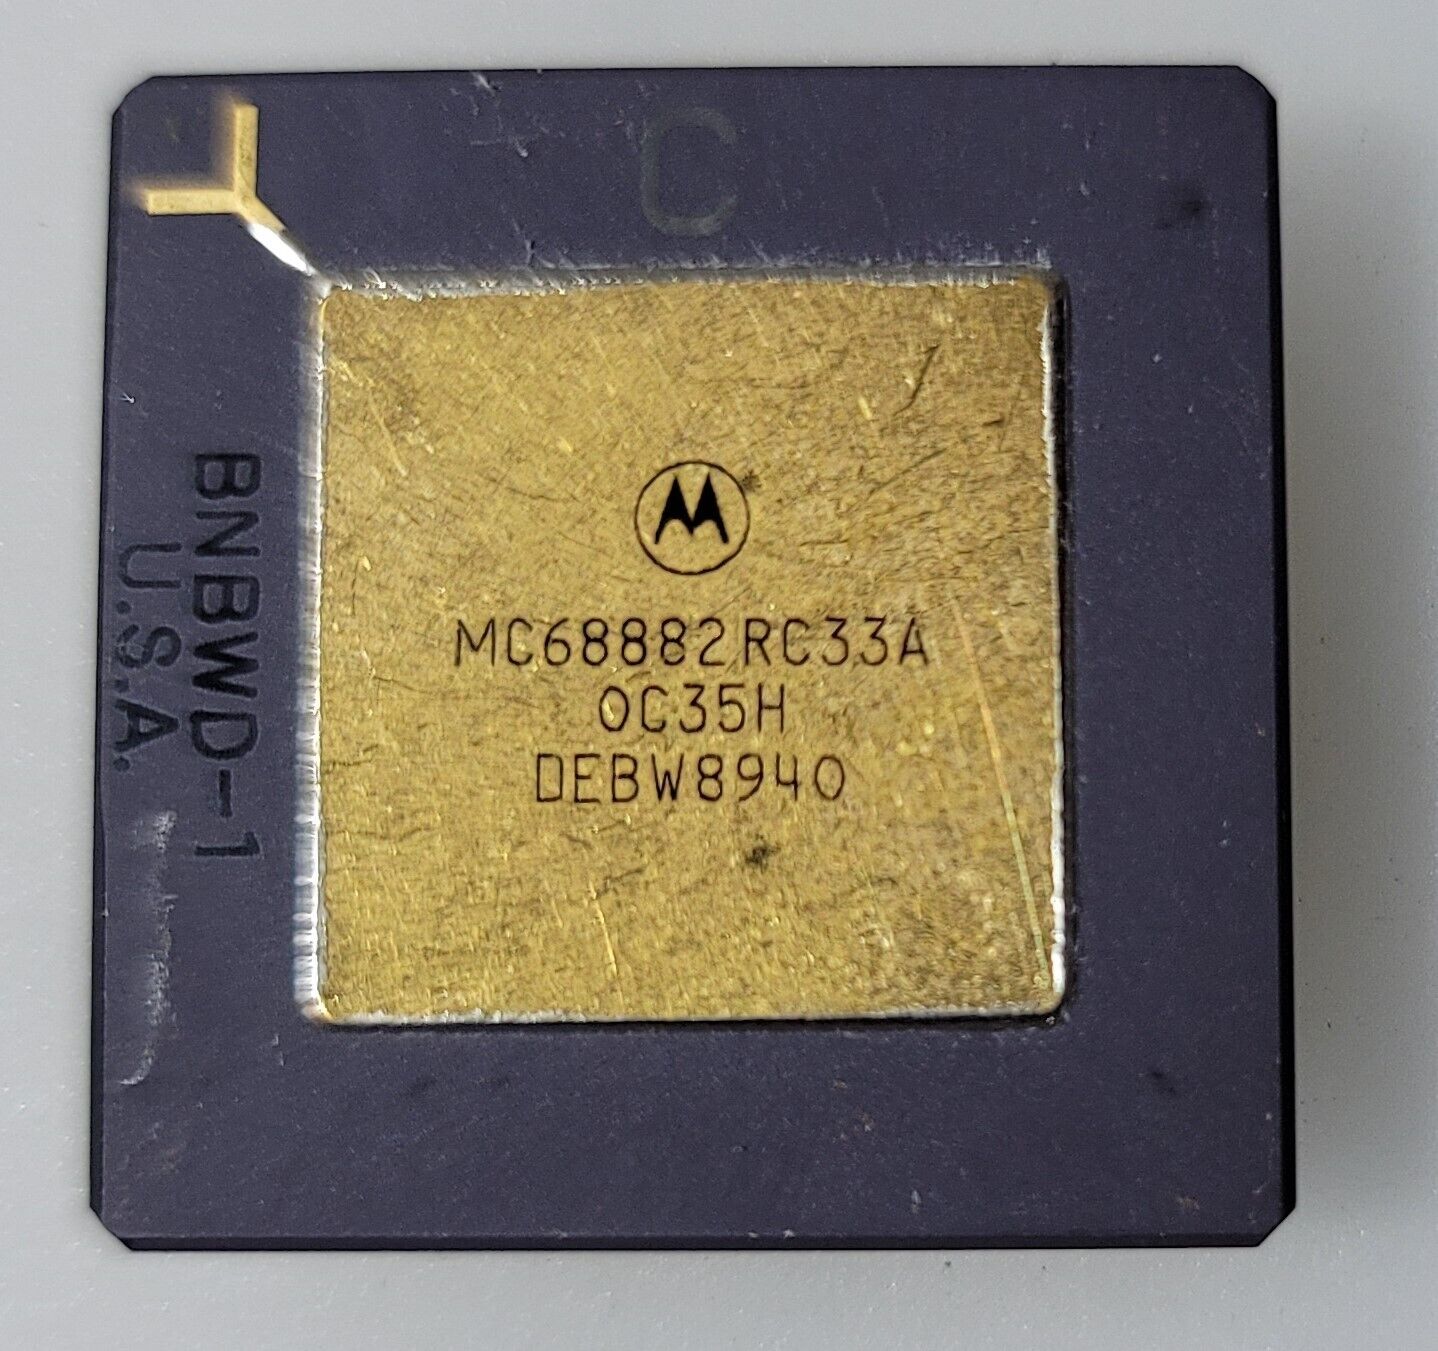 Vintage Rare Motorola MC68882RC33A Processor For Collection or Gold Recovery